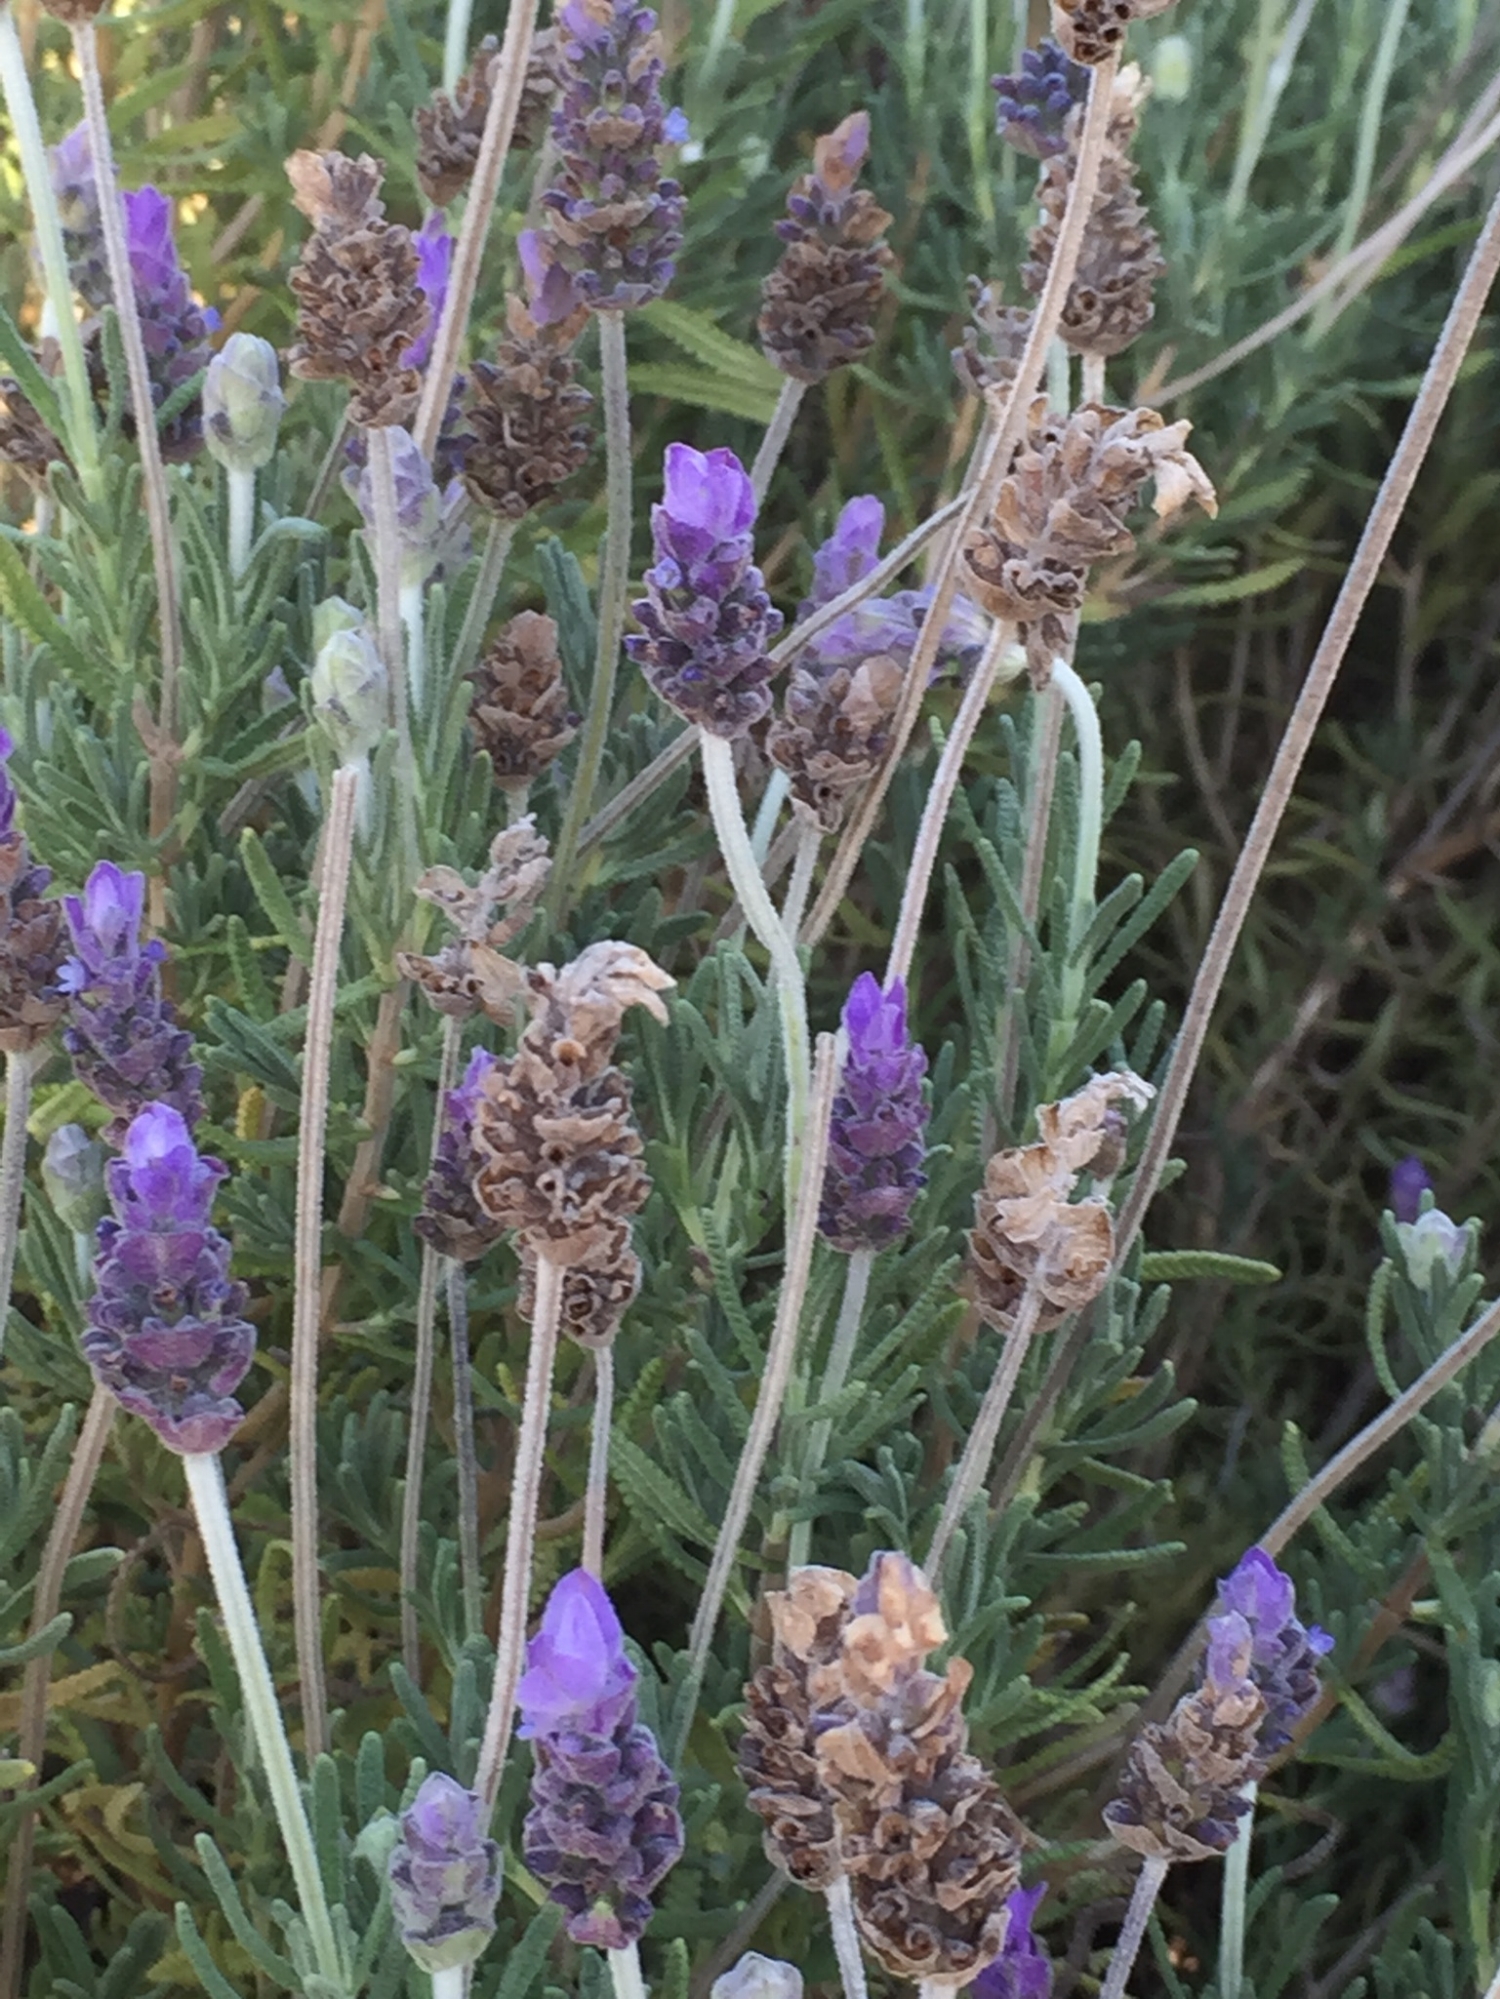 The bees love the lavendar.